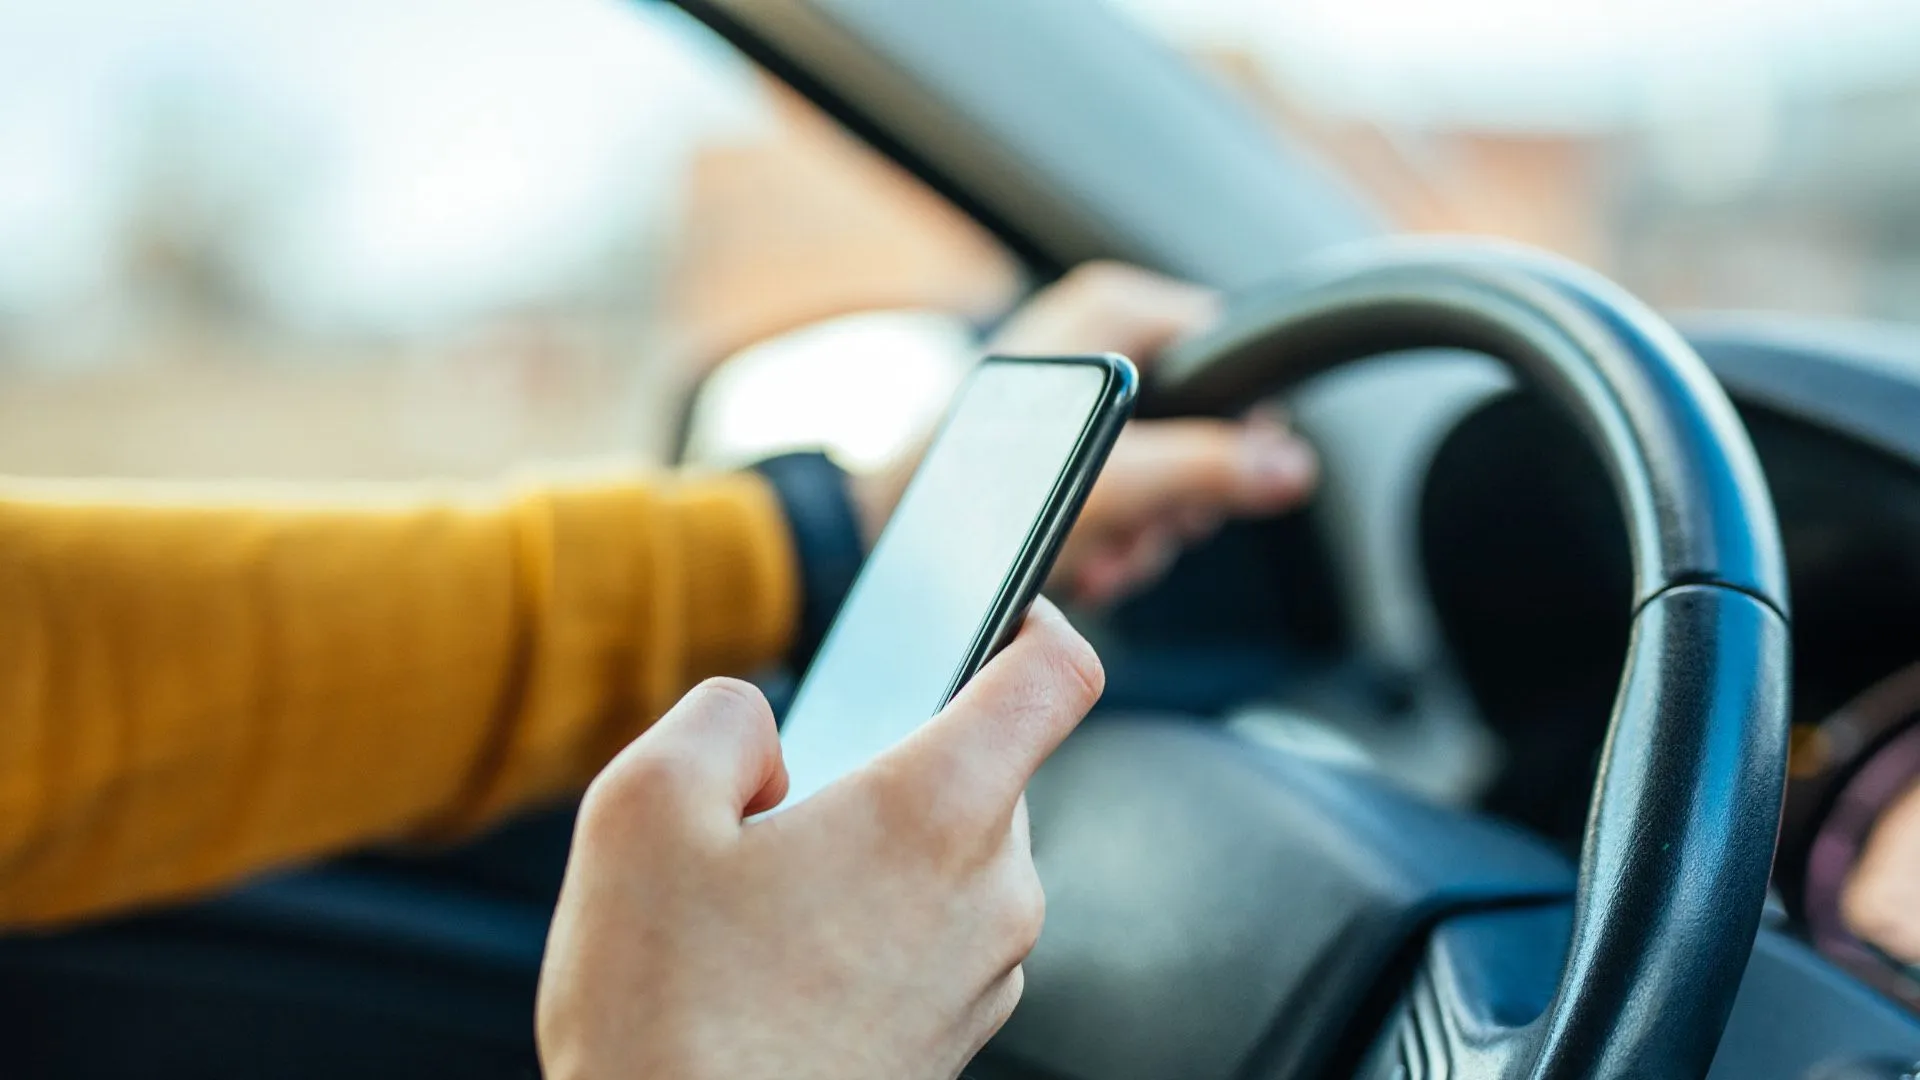 Catching Distracted Drivers With Technology